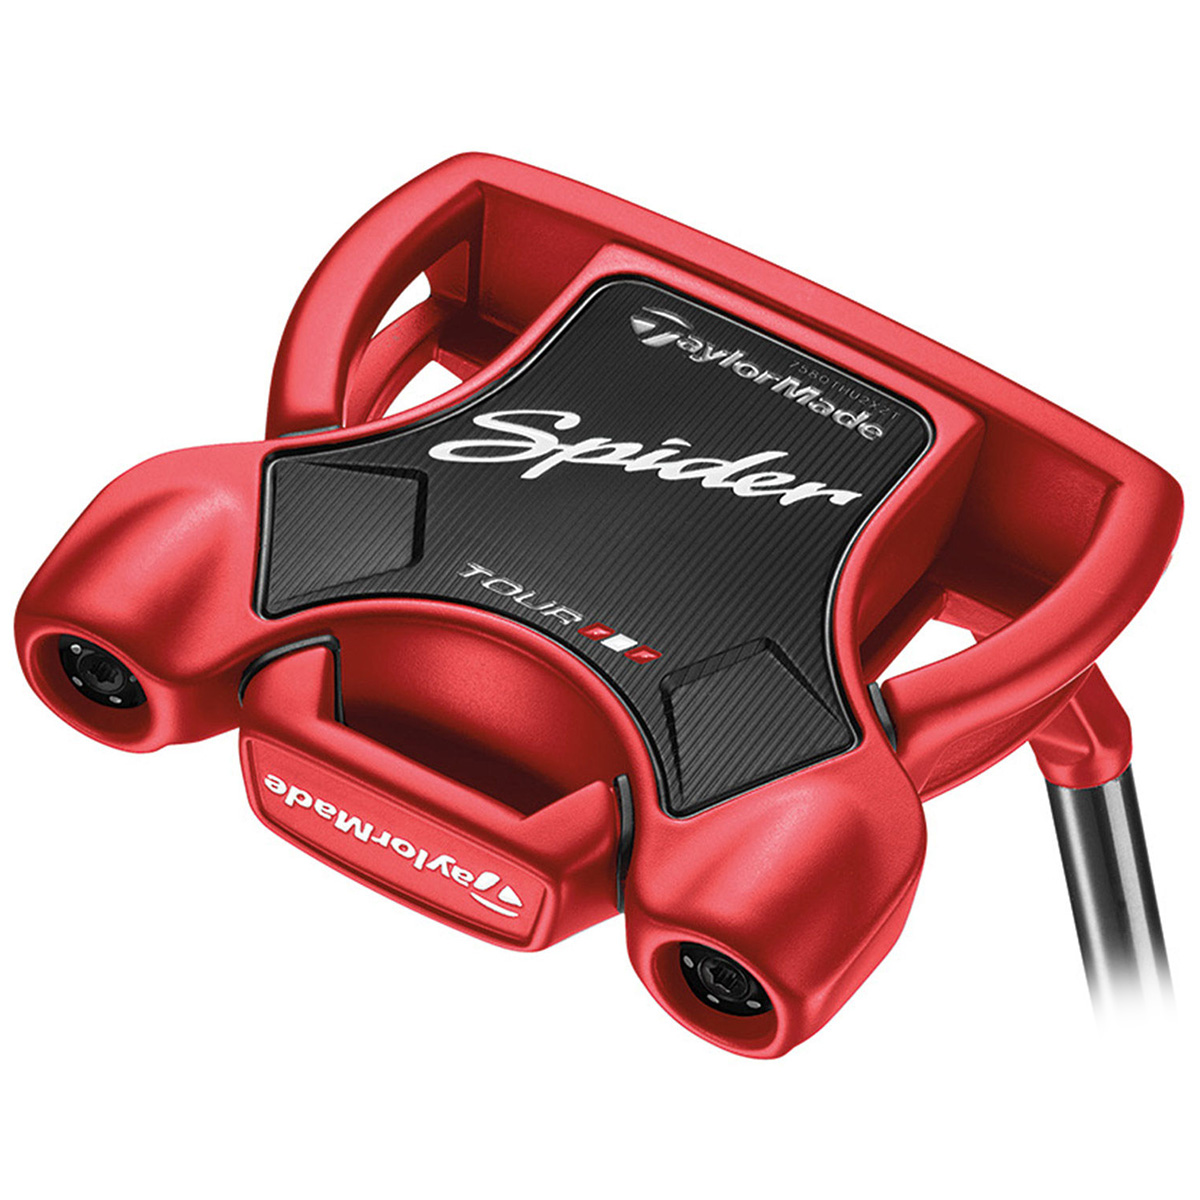 TaylorMade Tour Red Spider Putter from american golf